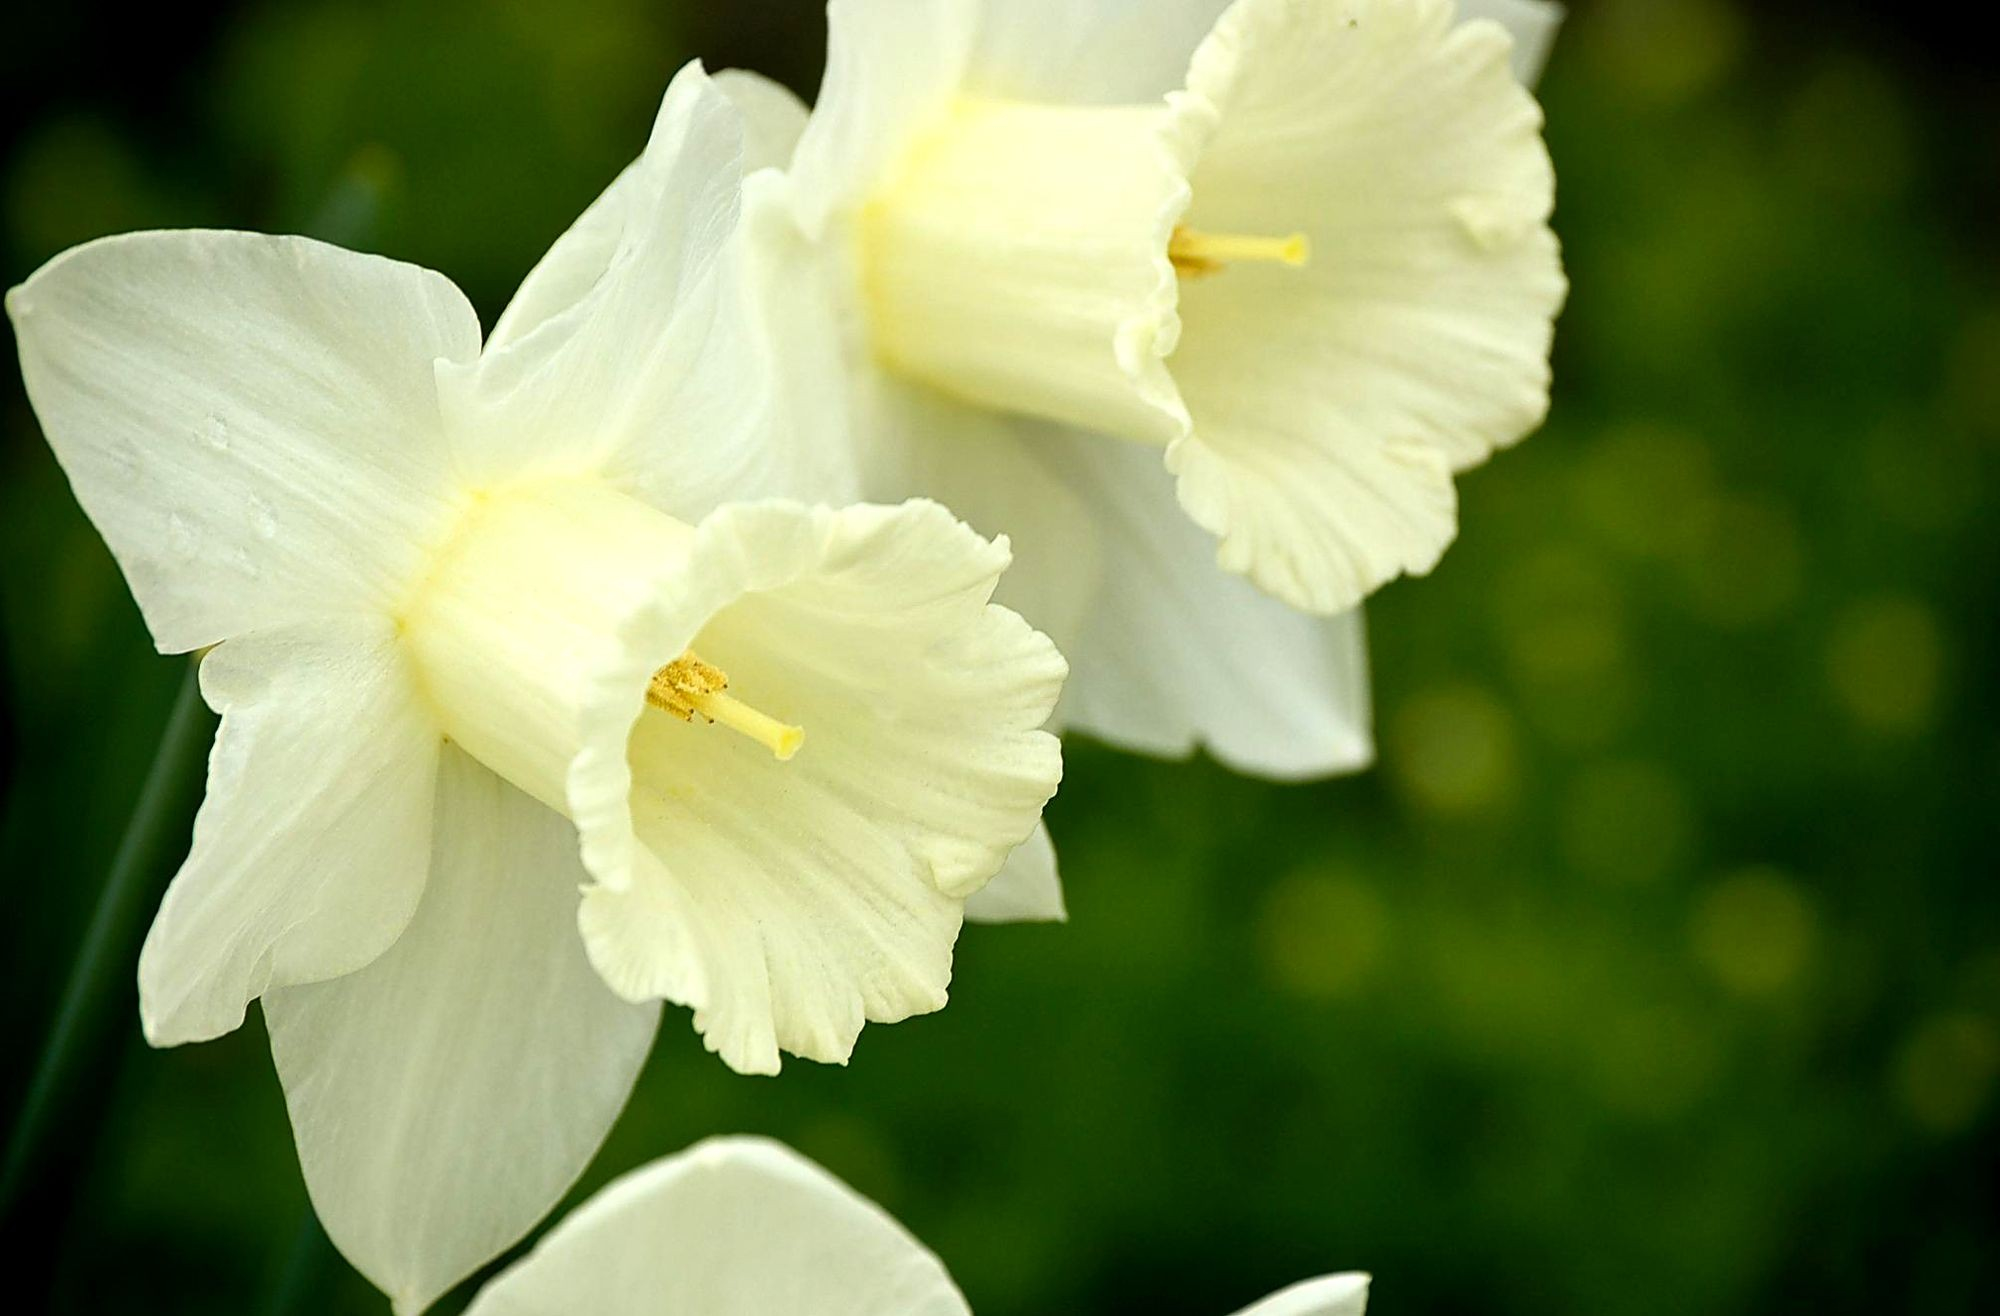 earth, daffodil, close up, flower, narcissus, white flower, flowers